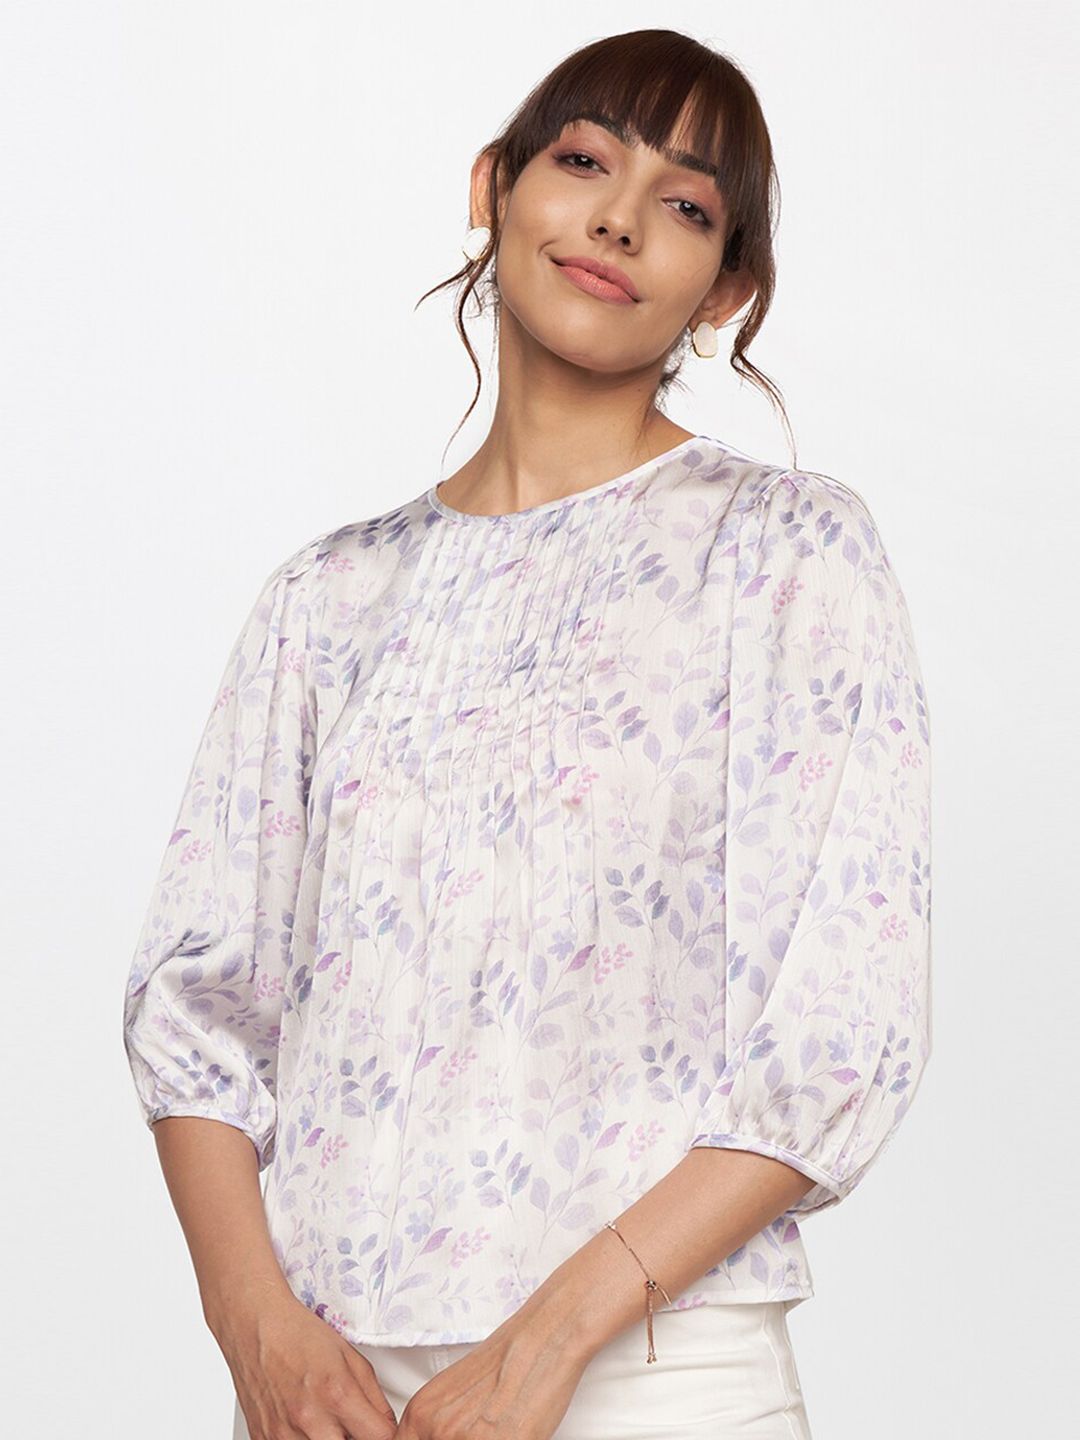 AND White & Violet Floral Printed Top Price in India